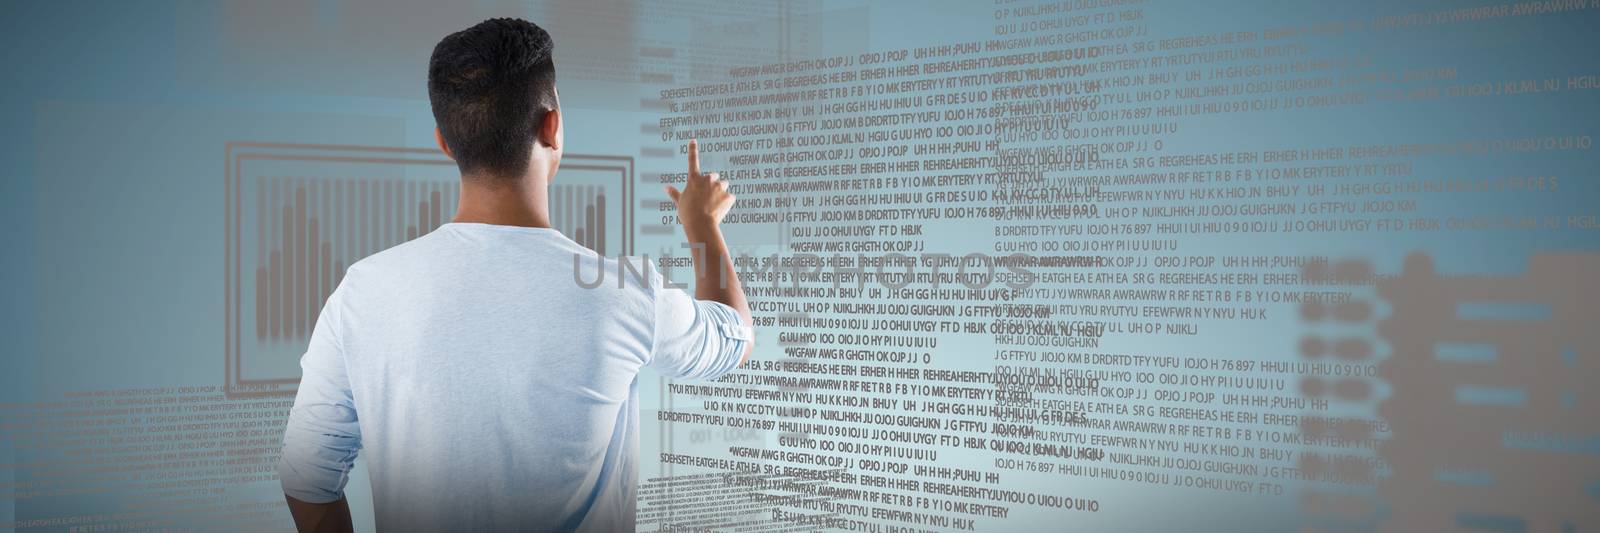 Man pretending to touch an invisible screen against white background against abstract grey background